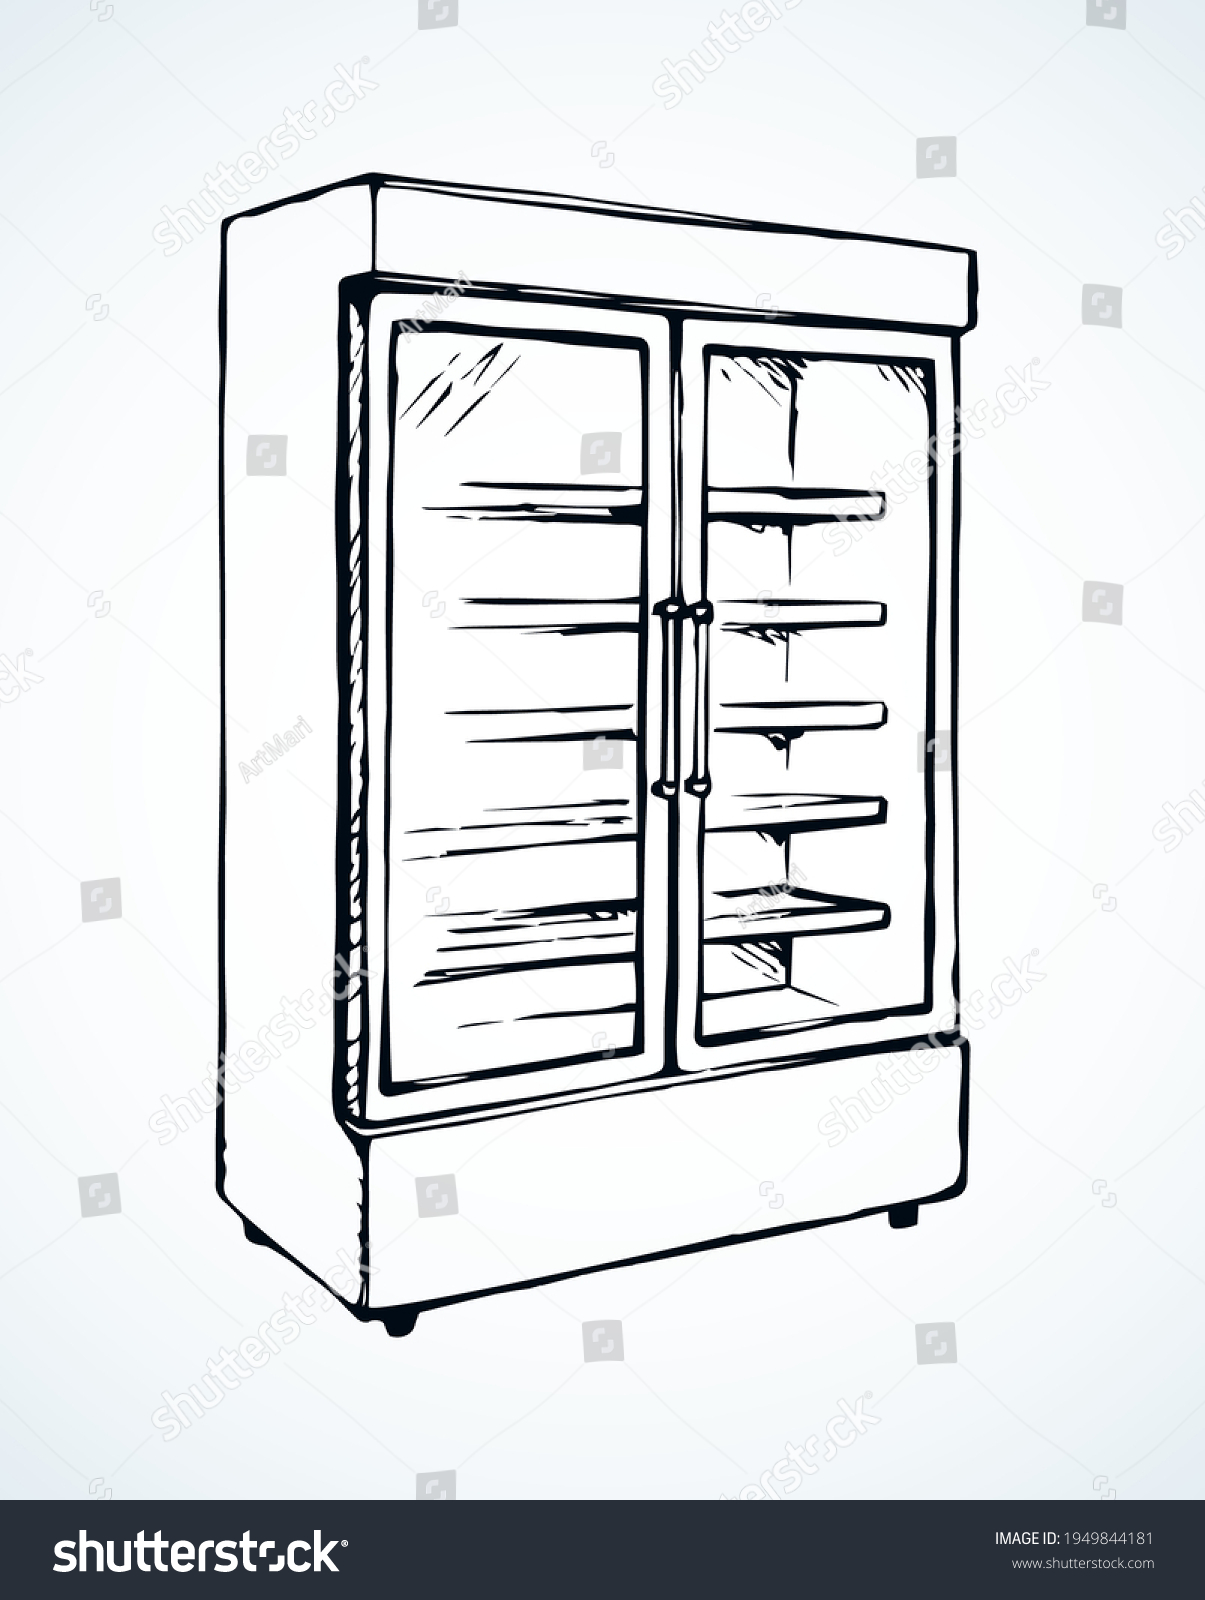 SVG of Big chiller show ice soda good case icebox stand on white background. Line black hand draw empty rack chest box cafe aisle device symbol sign in art modern doodle cartoon style on paper space for text svg